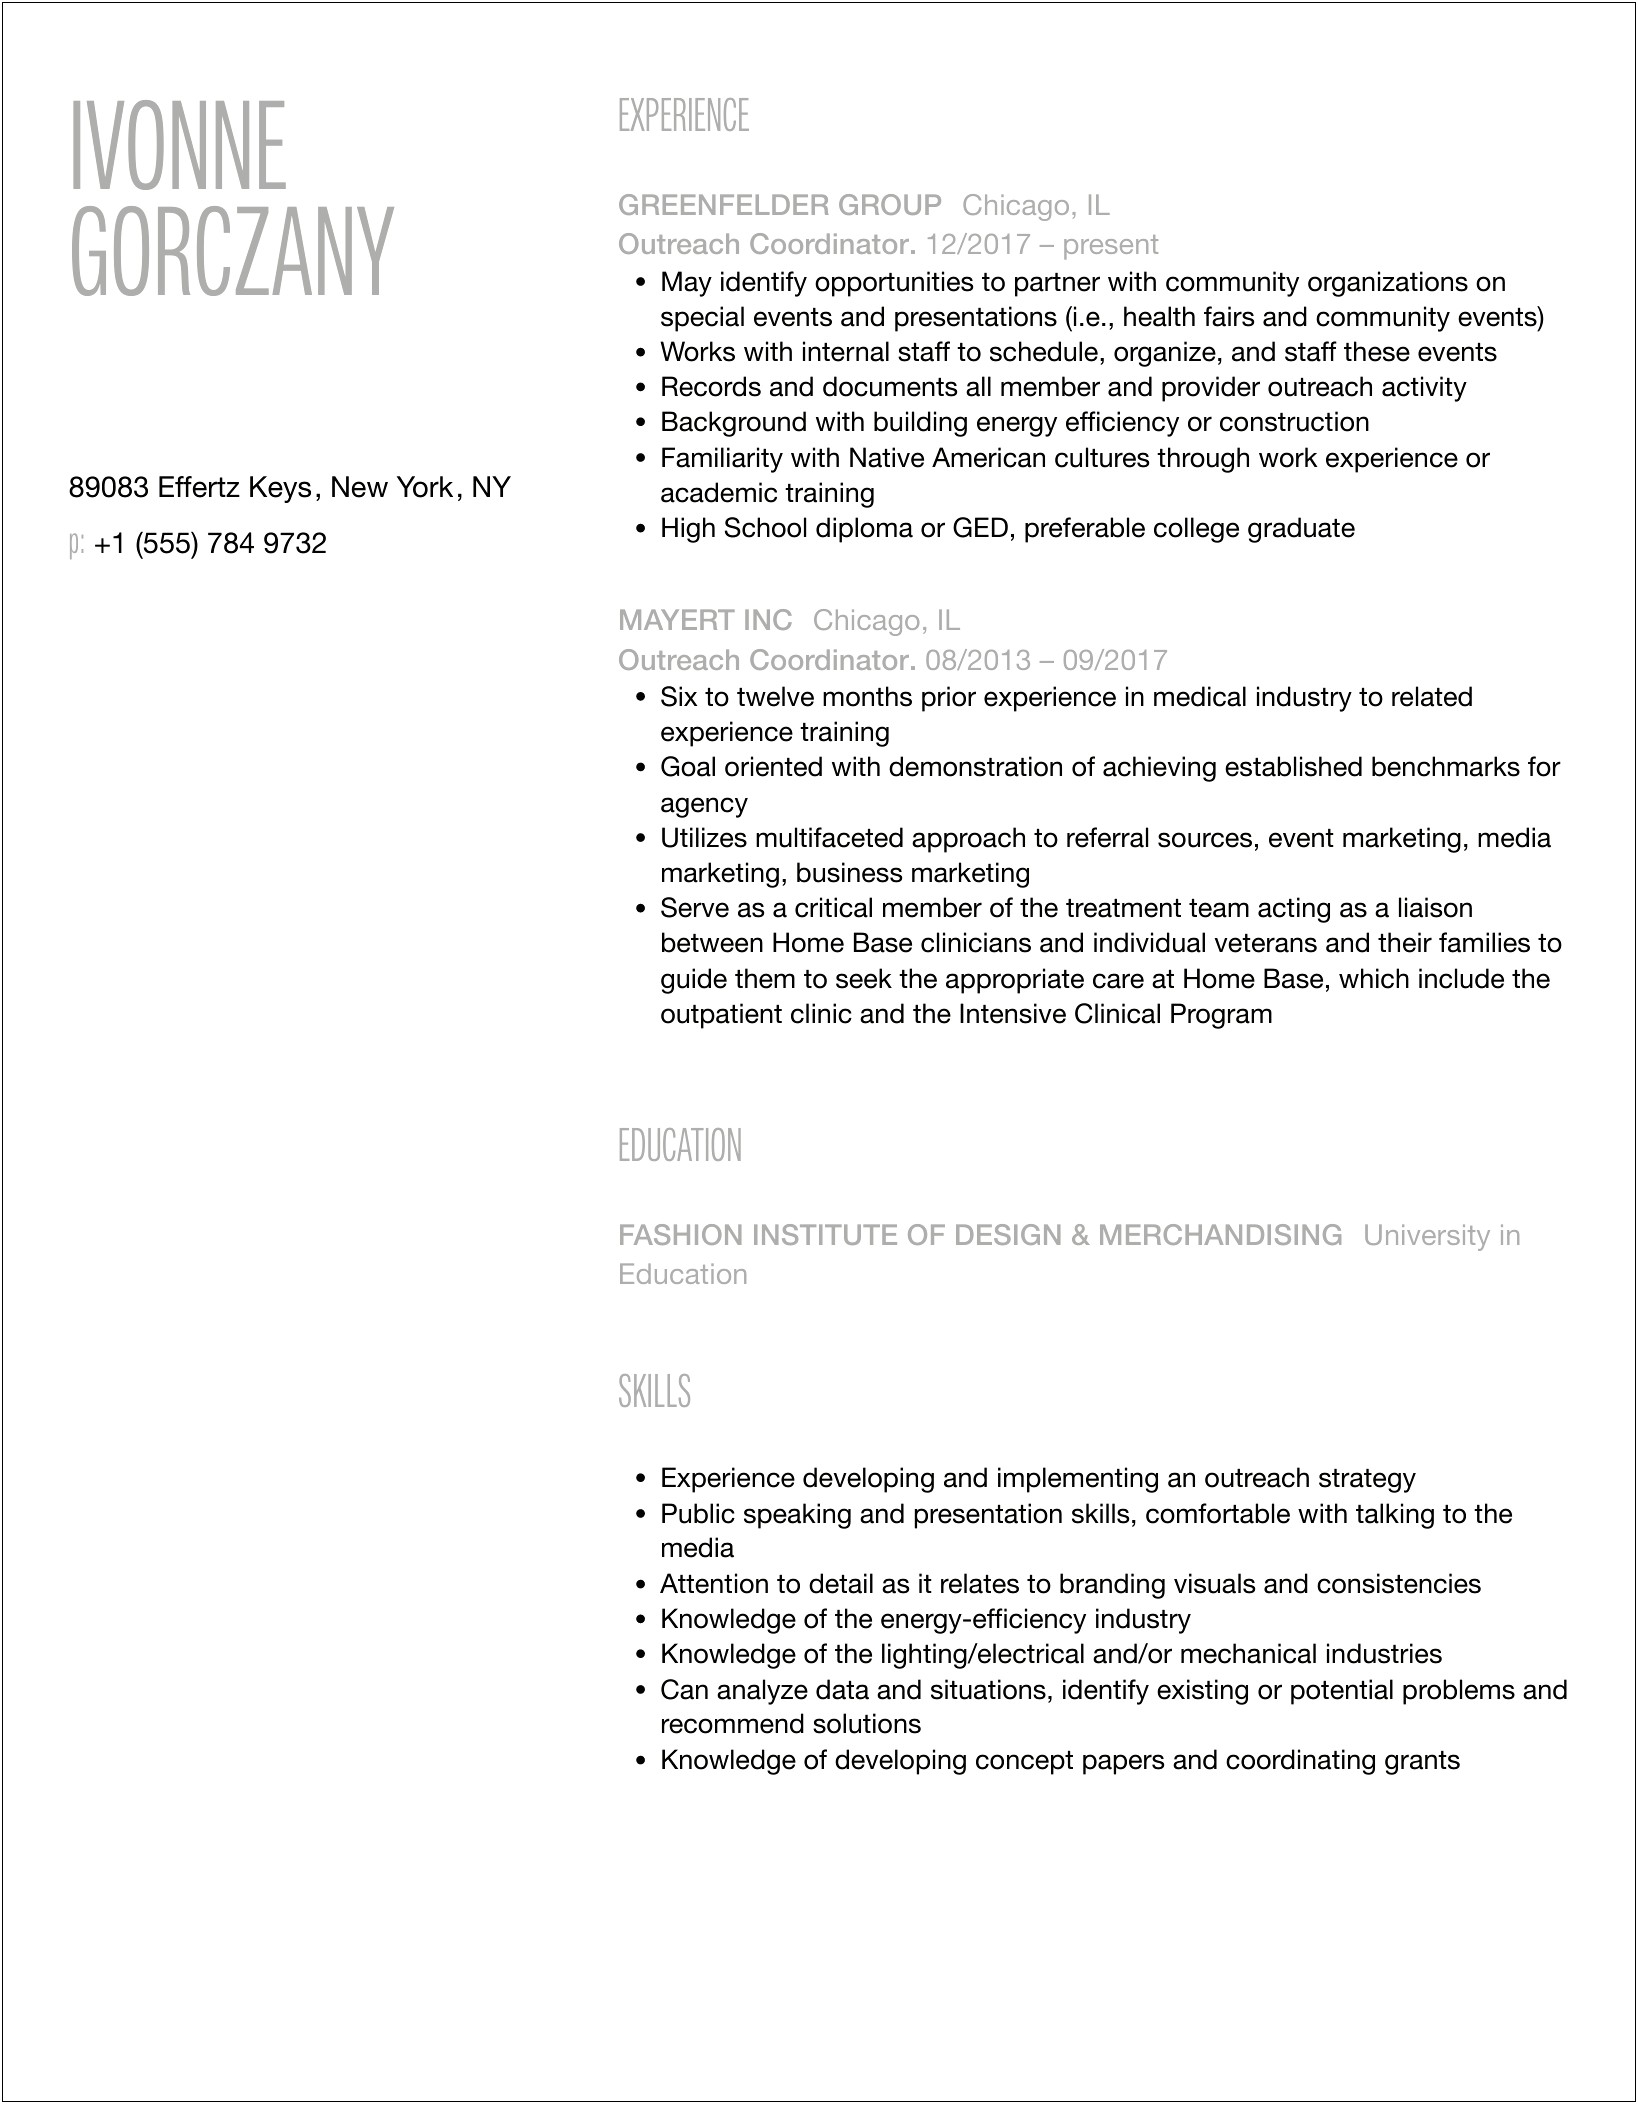 Resume Summary Section For Outreach Coordinator